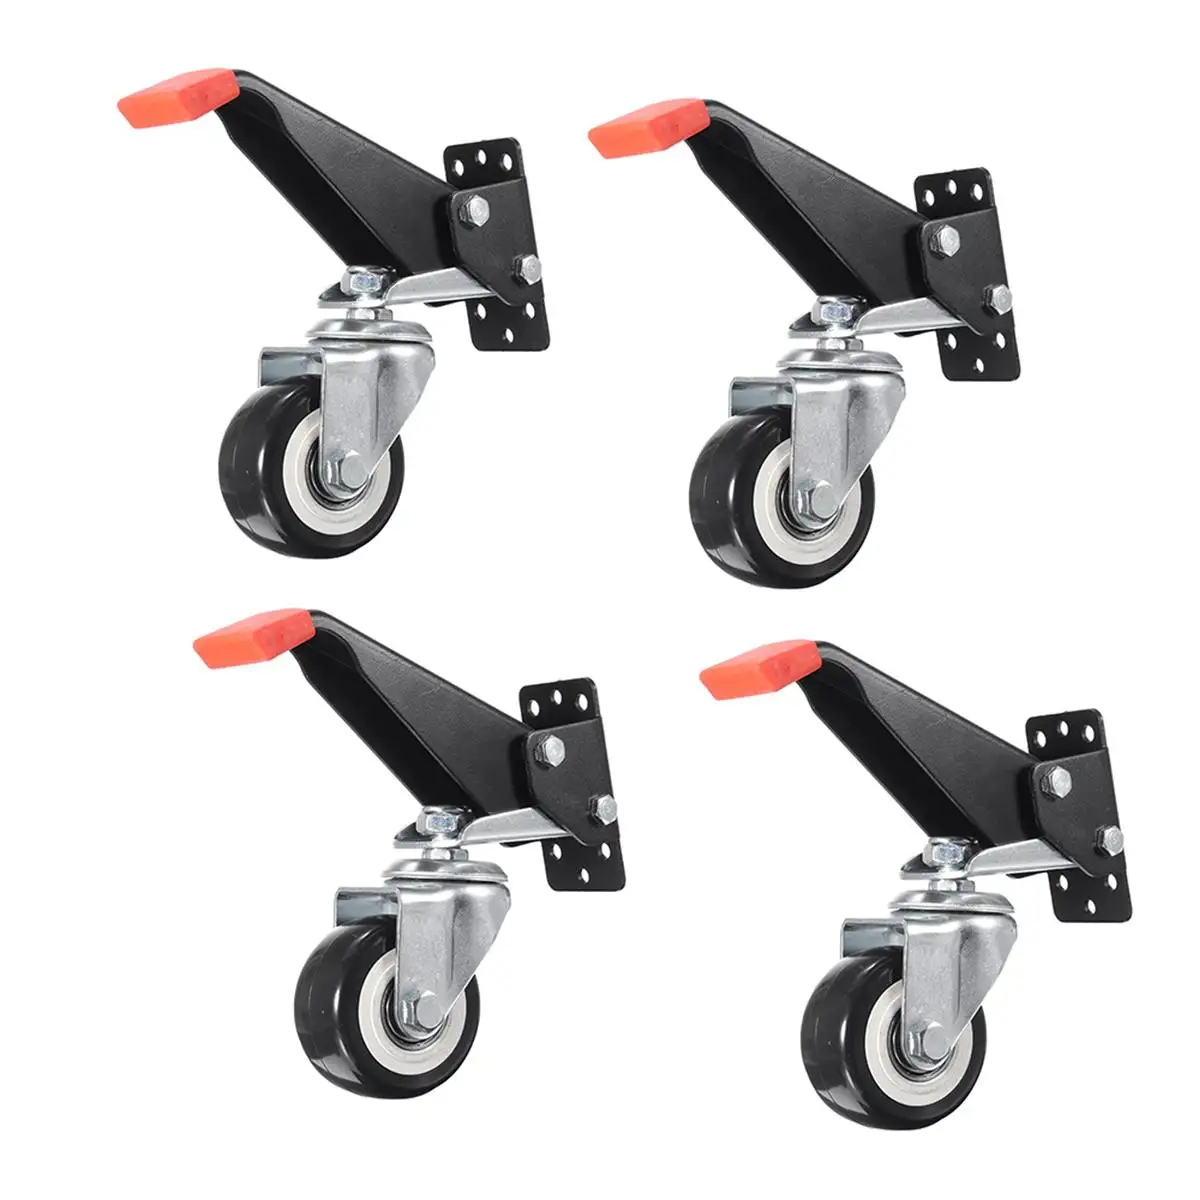 

4 Pcs/Set Heavy Duty 660 LBS Workbench Casters Kit Retractable Caster Wheels For Workbenches Machinery & Tables